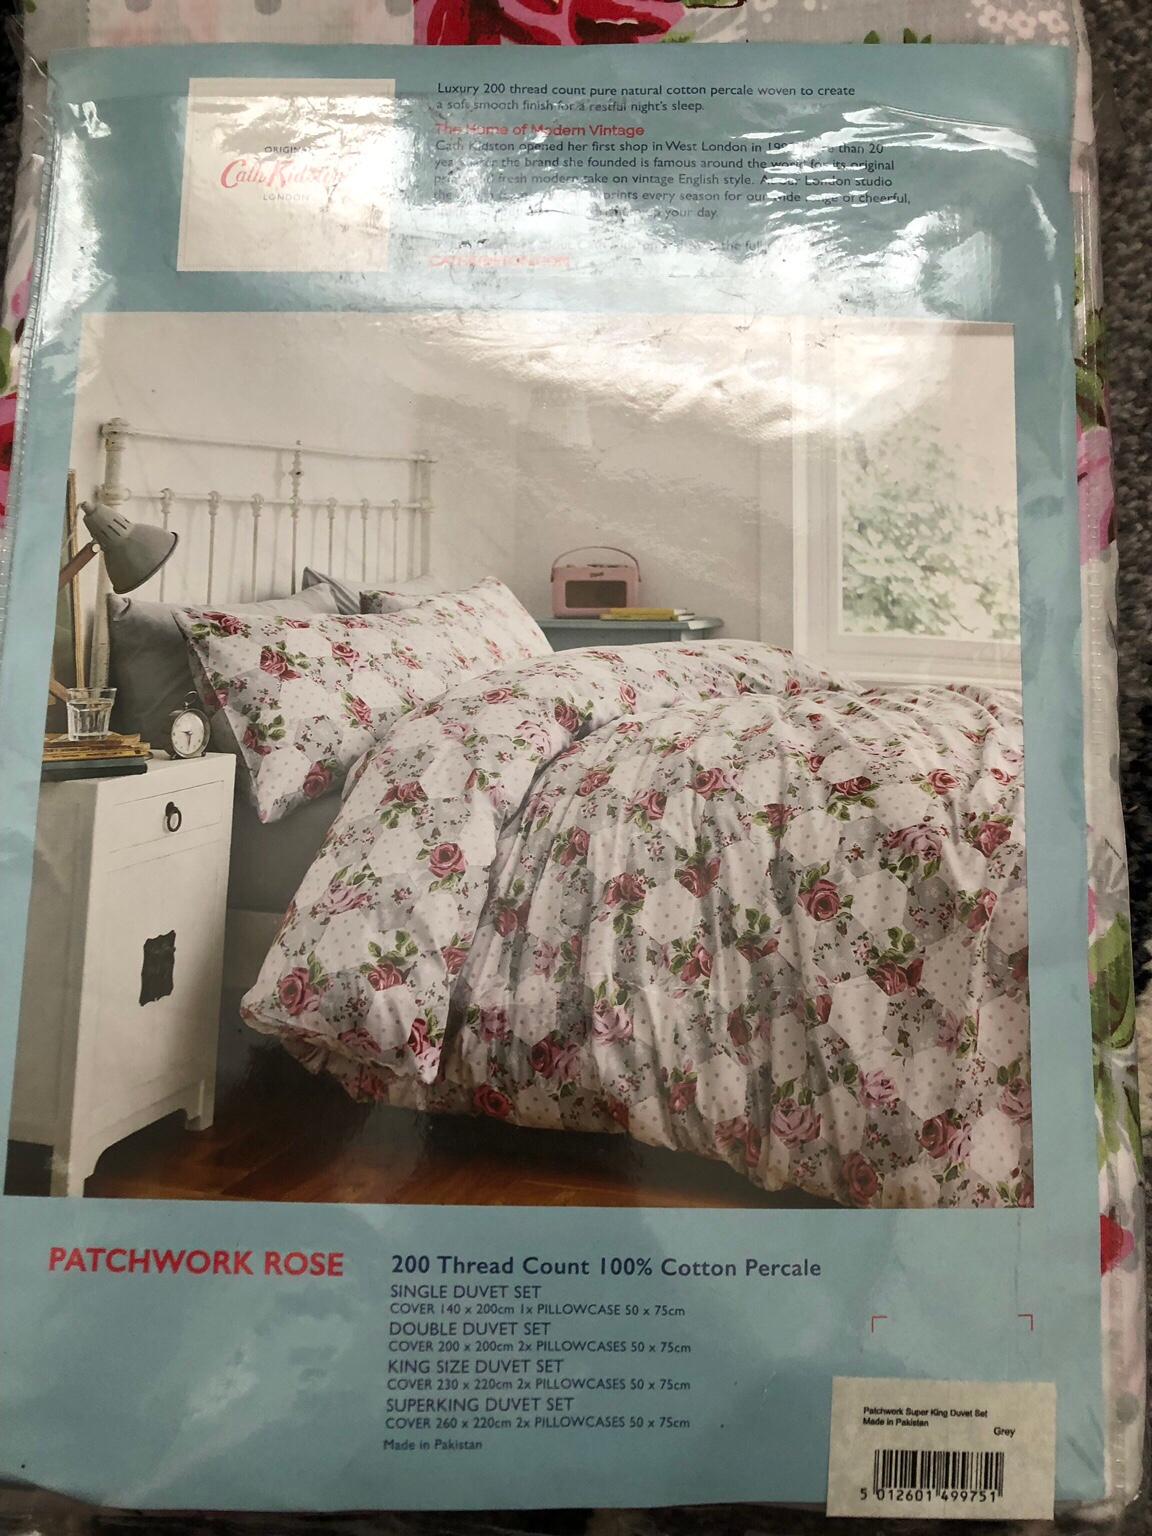 Cath Kidston Superking Duvet Cover Set In Le3 Frith Fur 50 00